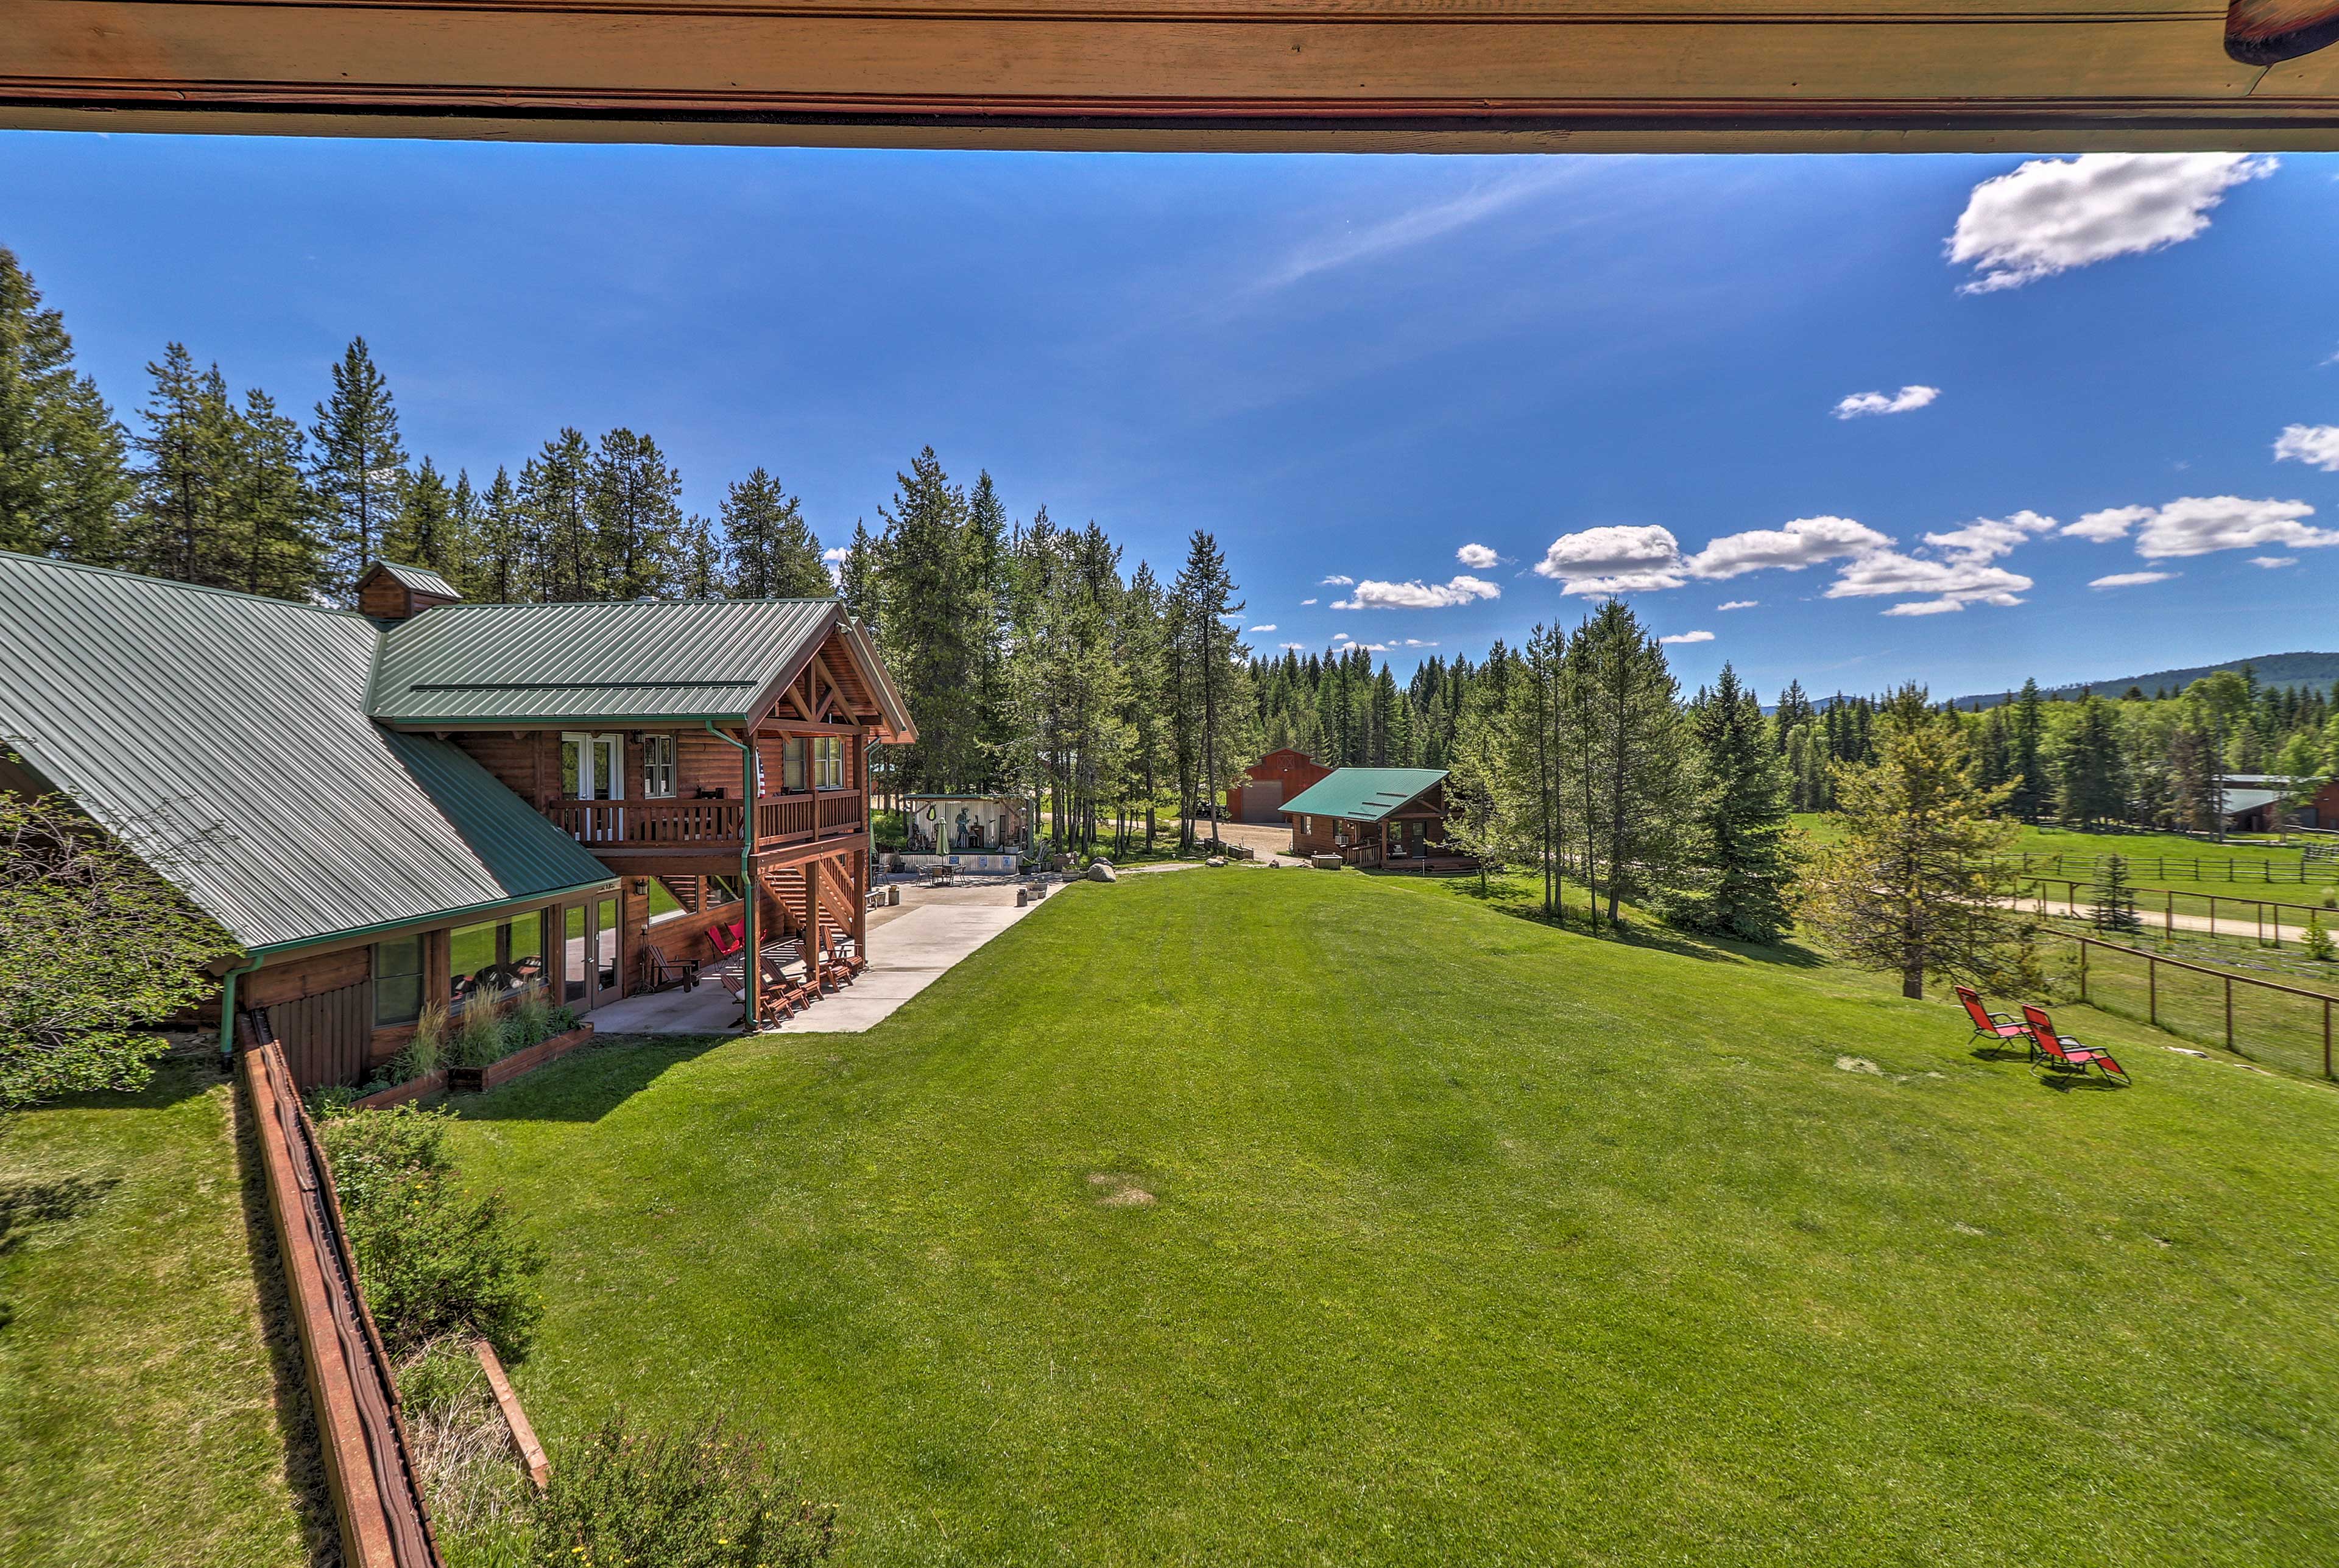 Gaze off the private deck and soak in the mountain views.